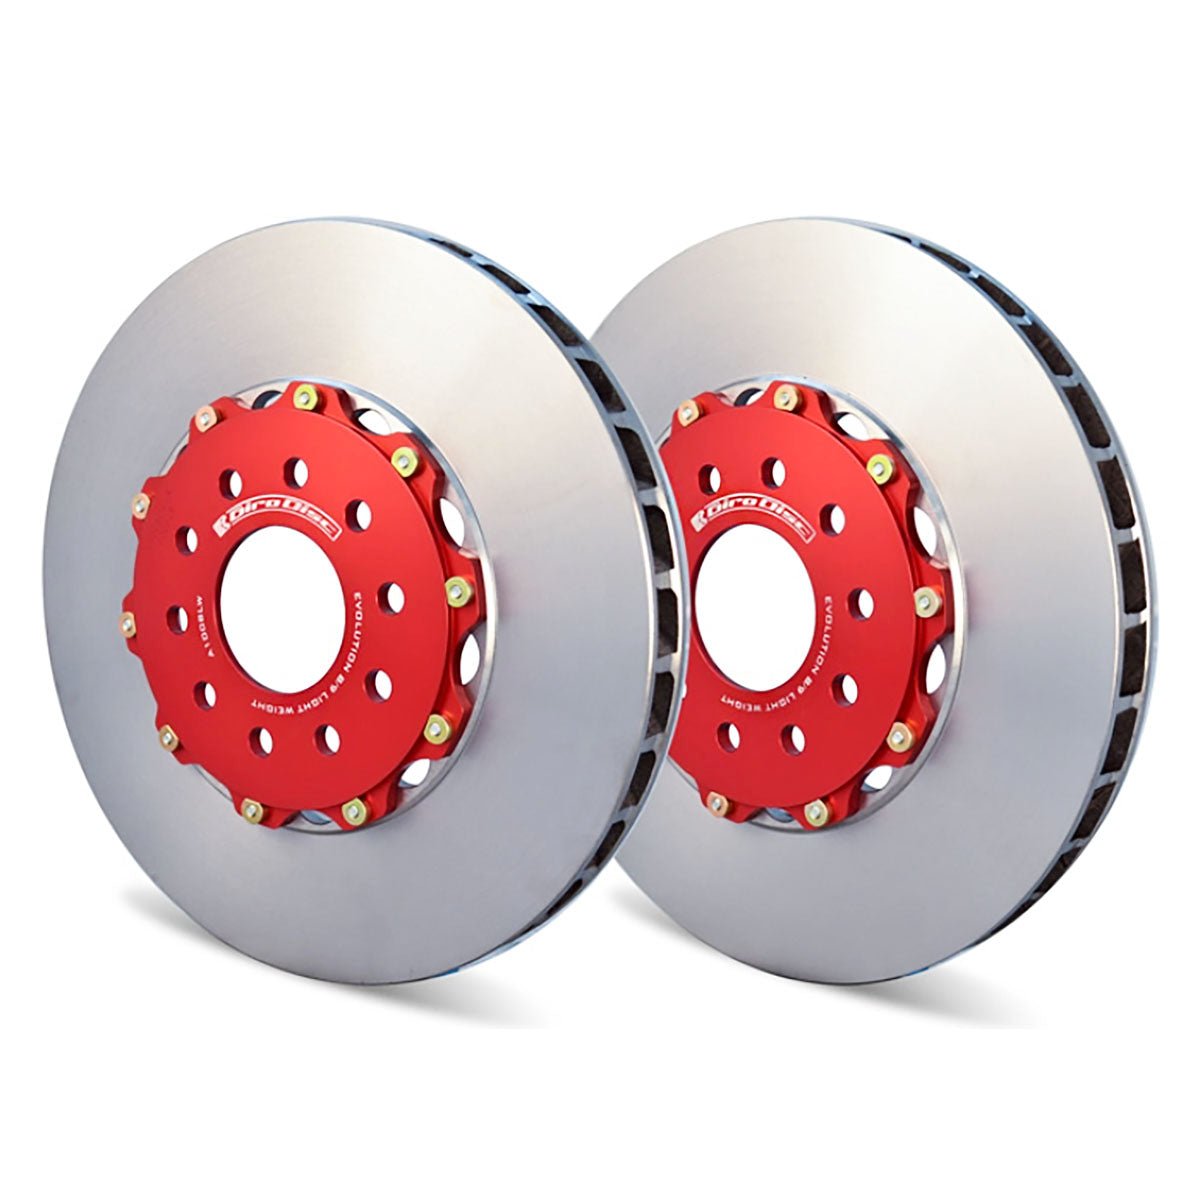 A1-008LW Ultra Lite Girodisc 2pc Front Brake Rotors for Evo 6/7/8/9 - Competition Motorsport